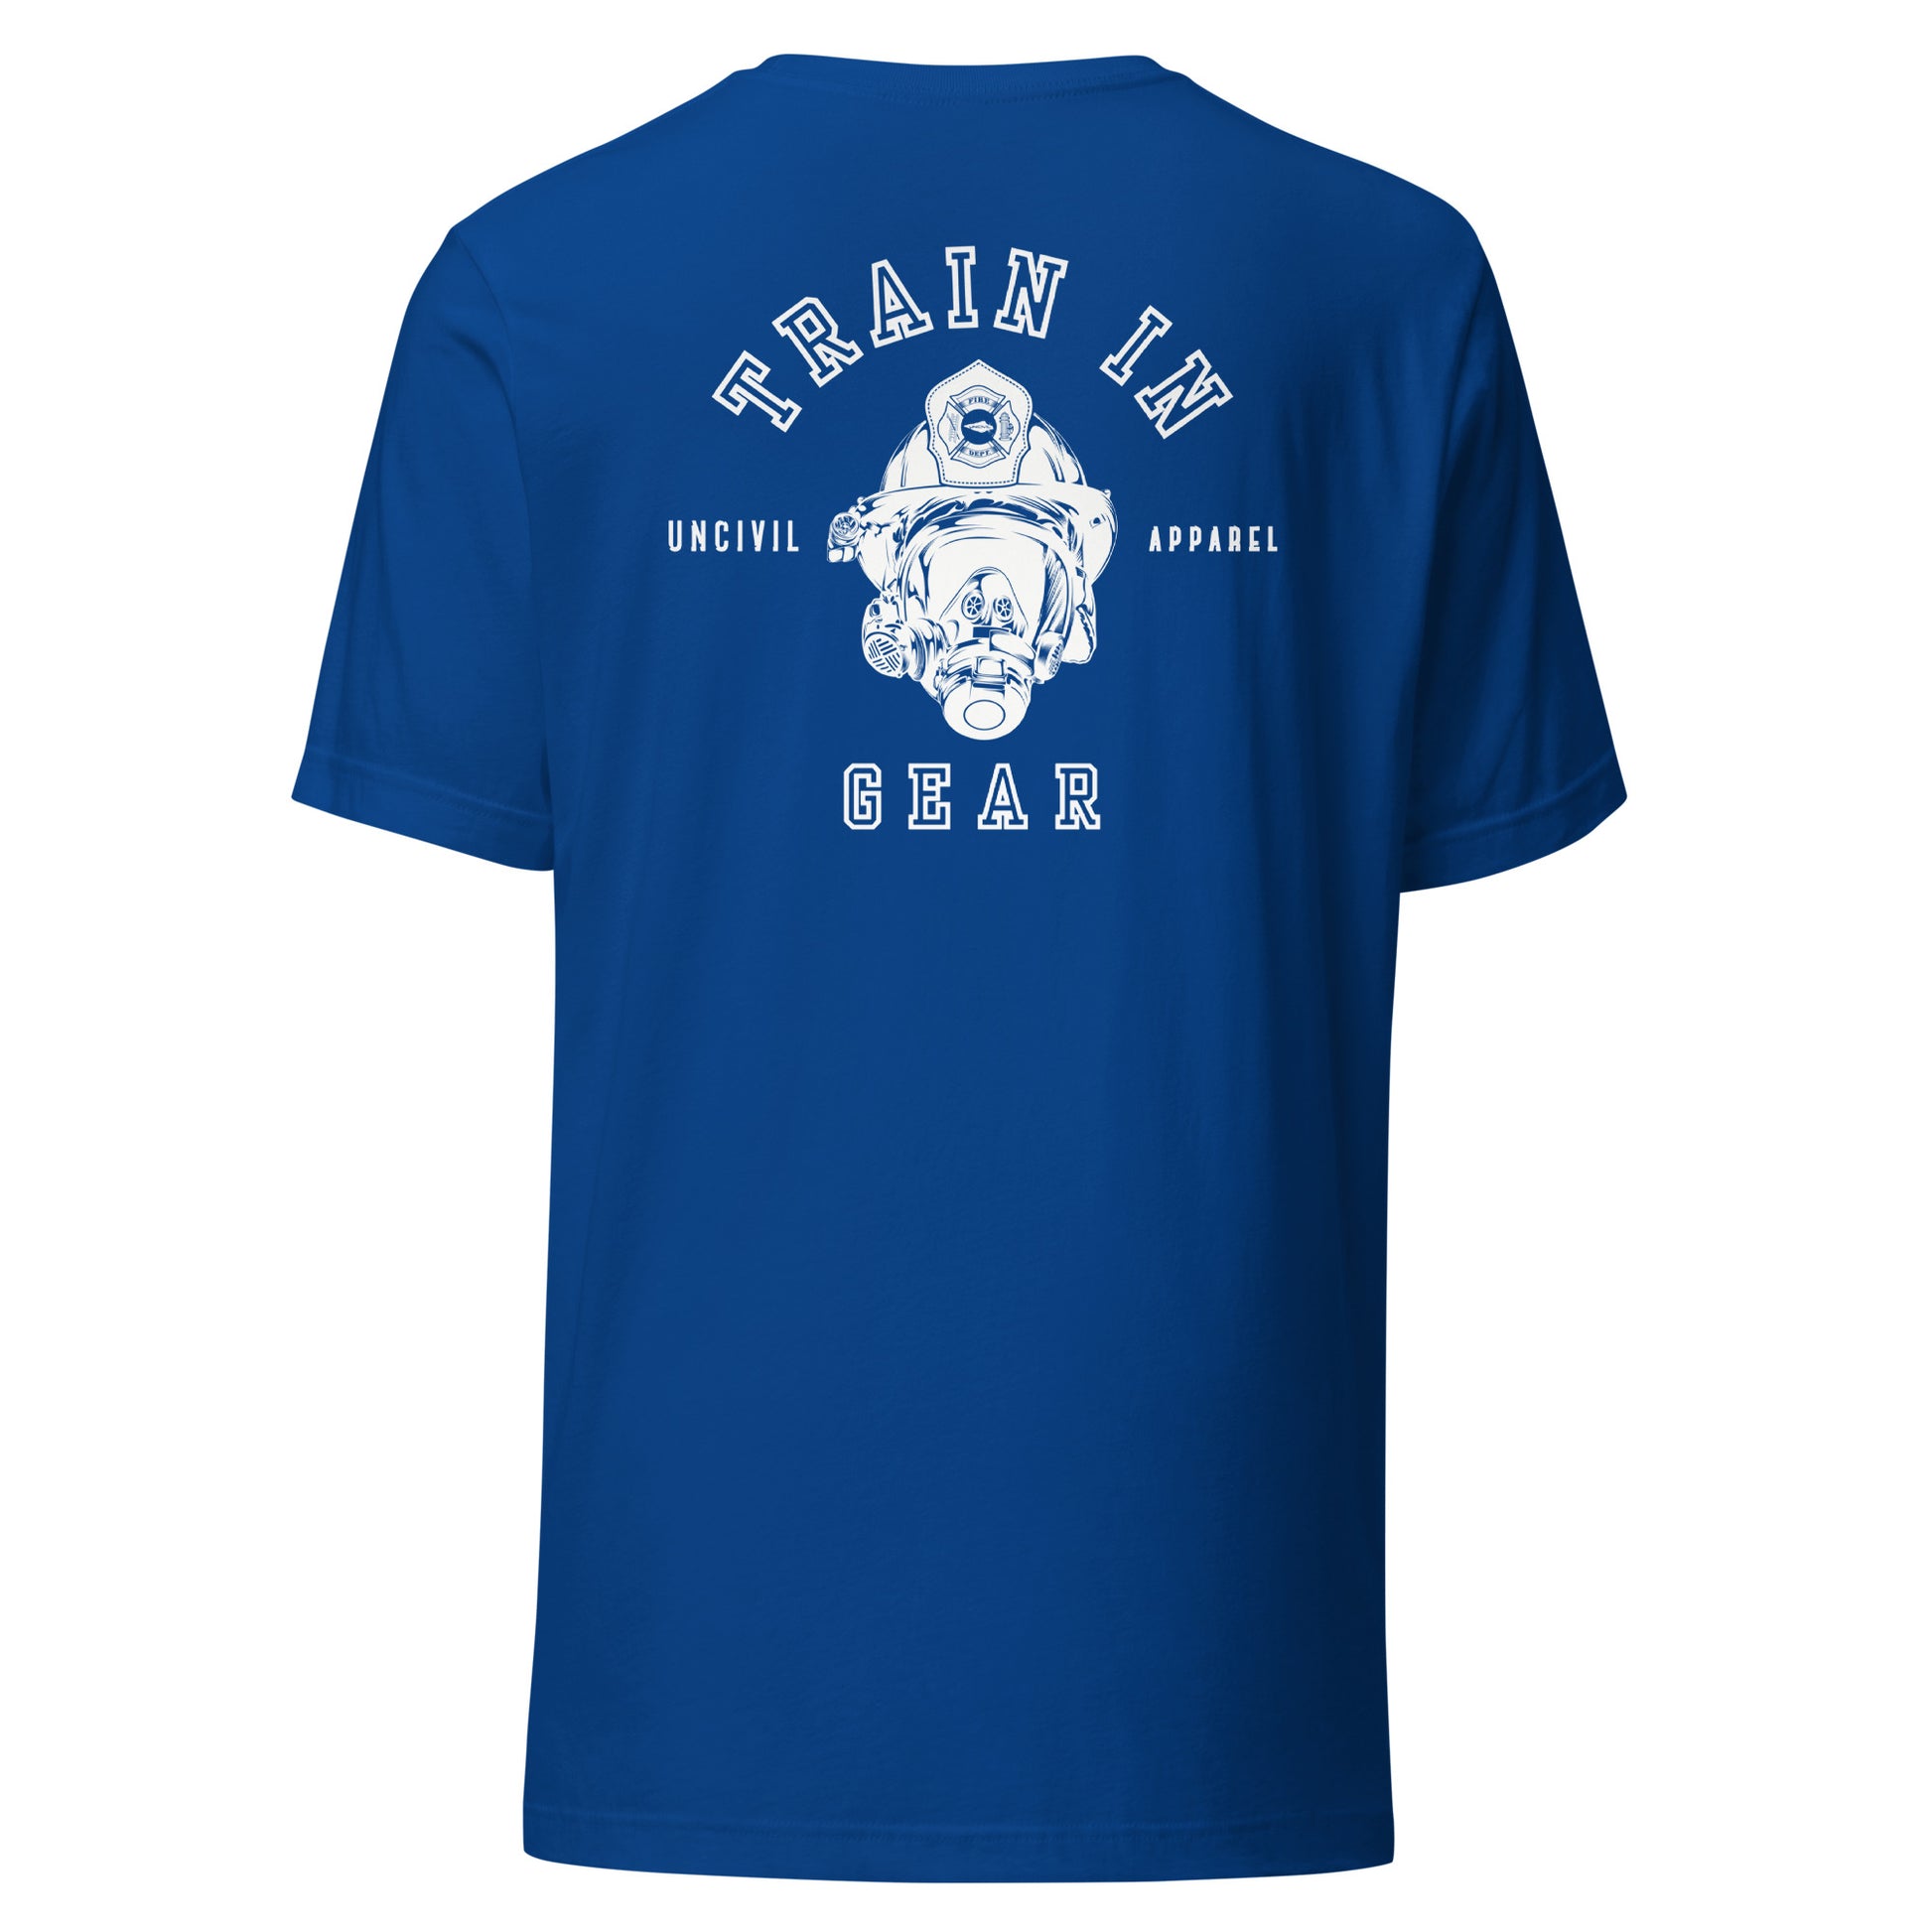 Train in Gear Graphic T-shirt, Firefighter and Military shirts, Royal Blue.